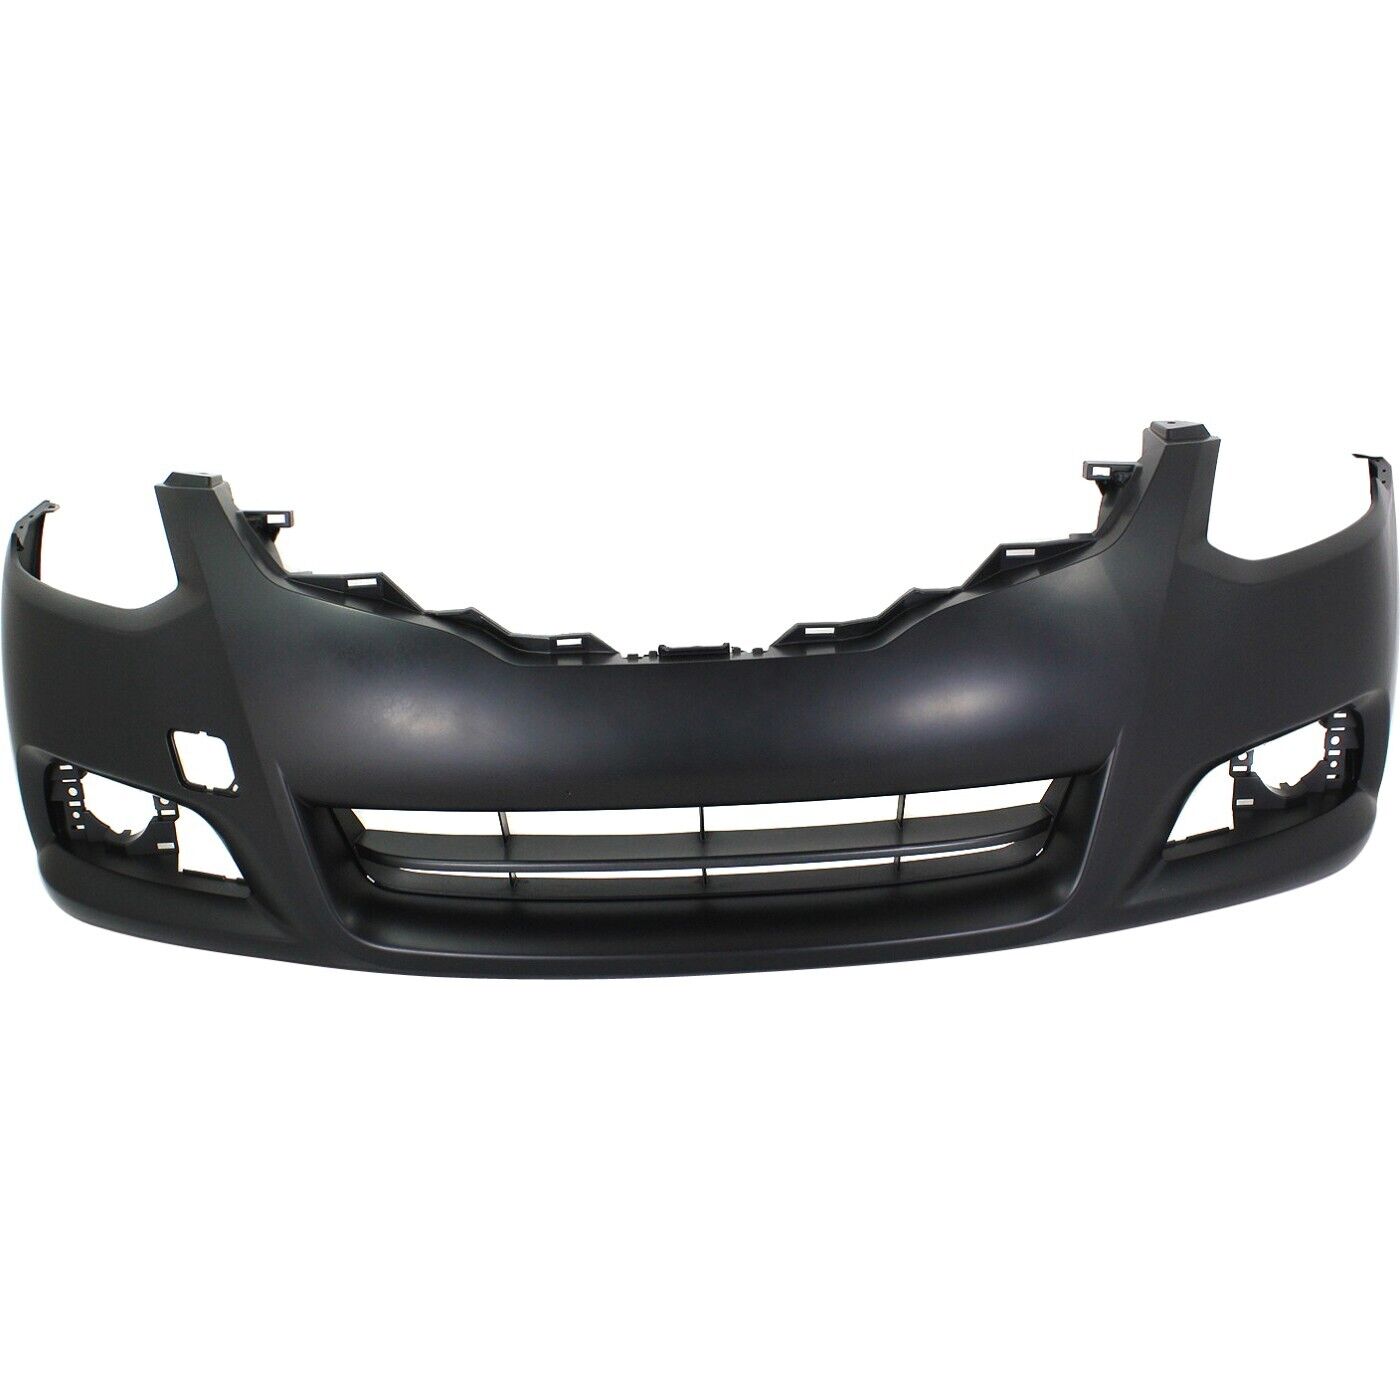 Front Bumper Cover For 2010-2013 Nissan Altima Coupe w/ fog lamp holes Primed